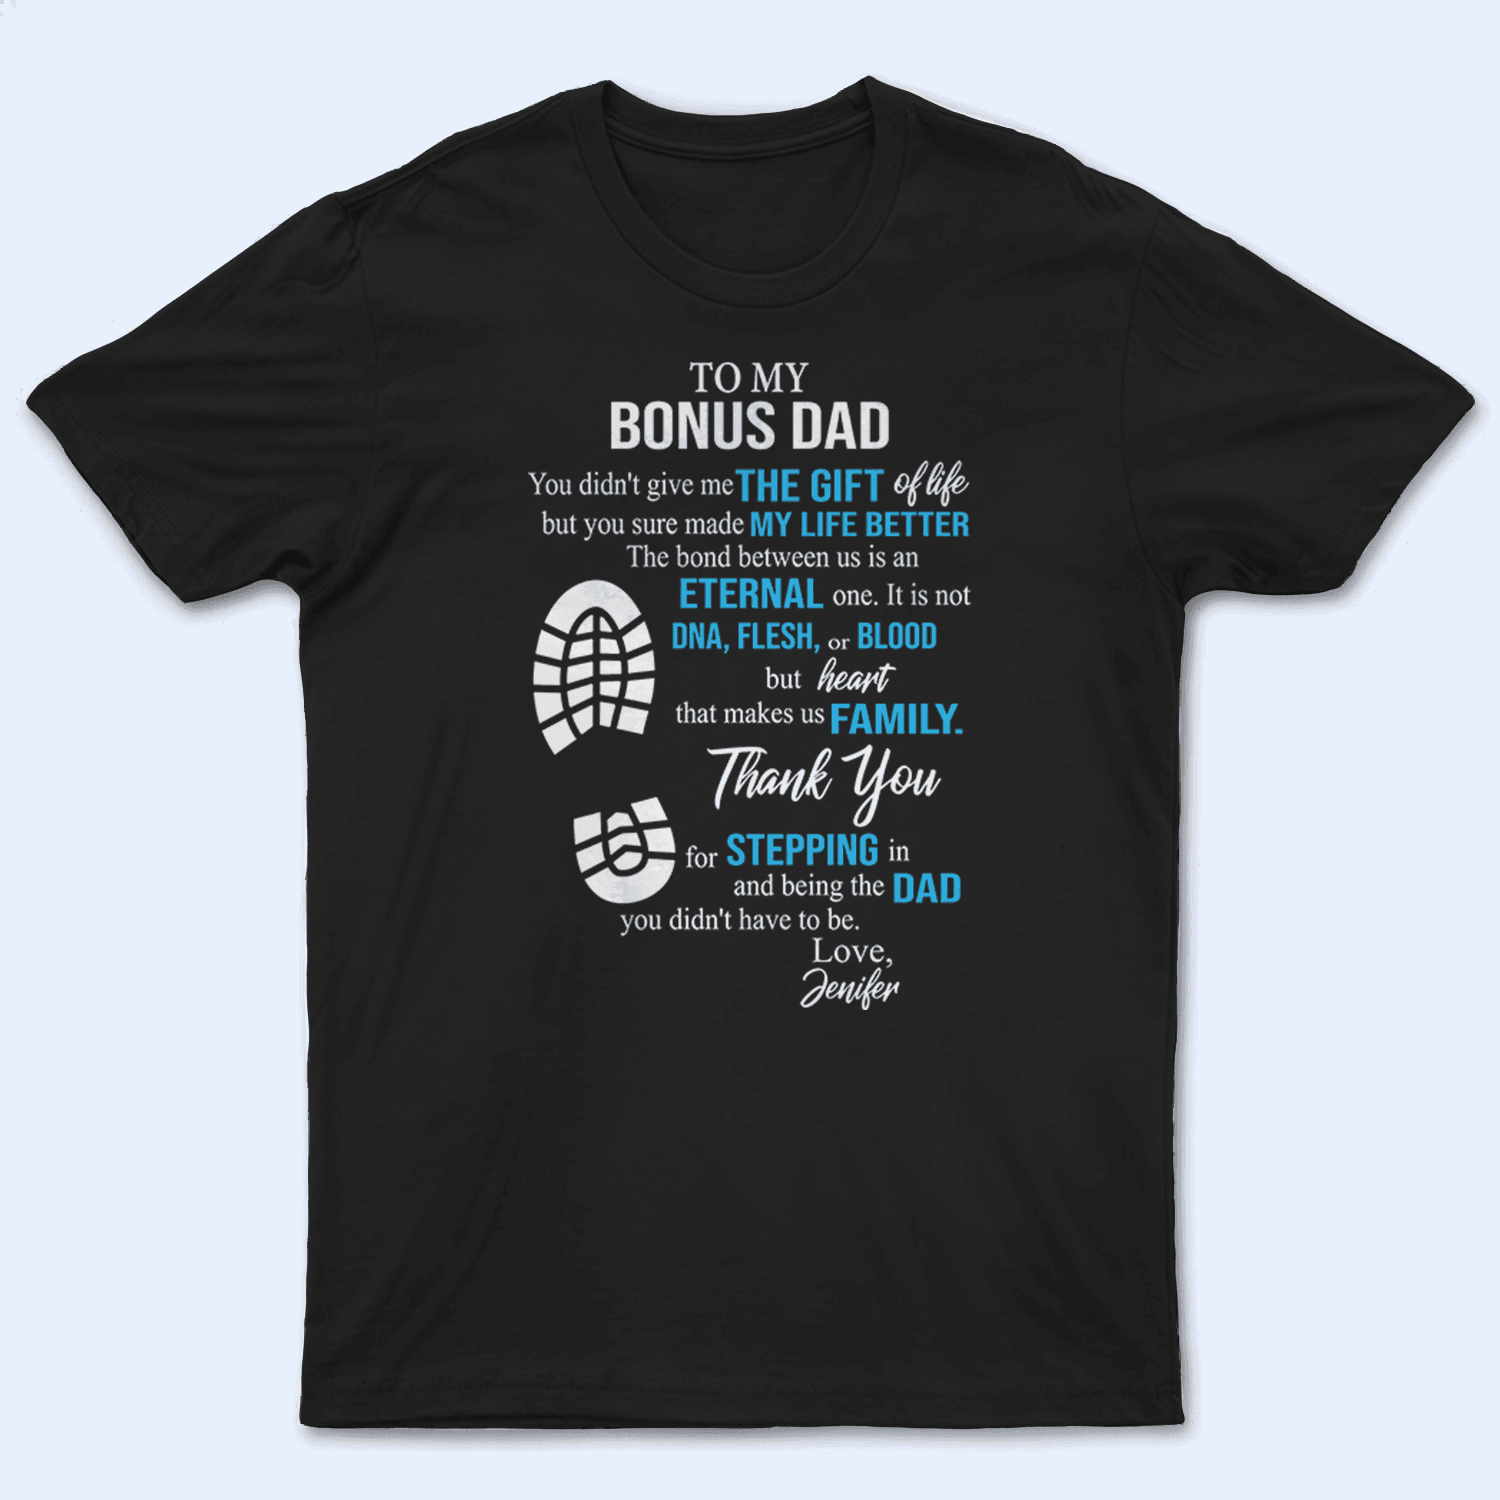 To My Bonus Dad You Made My Life Better - Personalized Custom T Shirt - Birthday, Loving, Funny Gift for Grandfather/Dad/Father, Husband, Grandparent - Suzitee Store